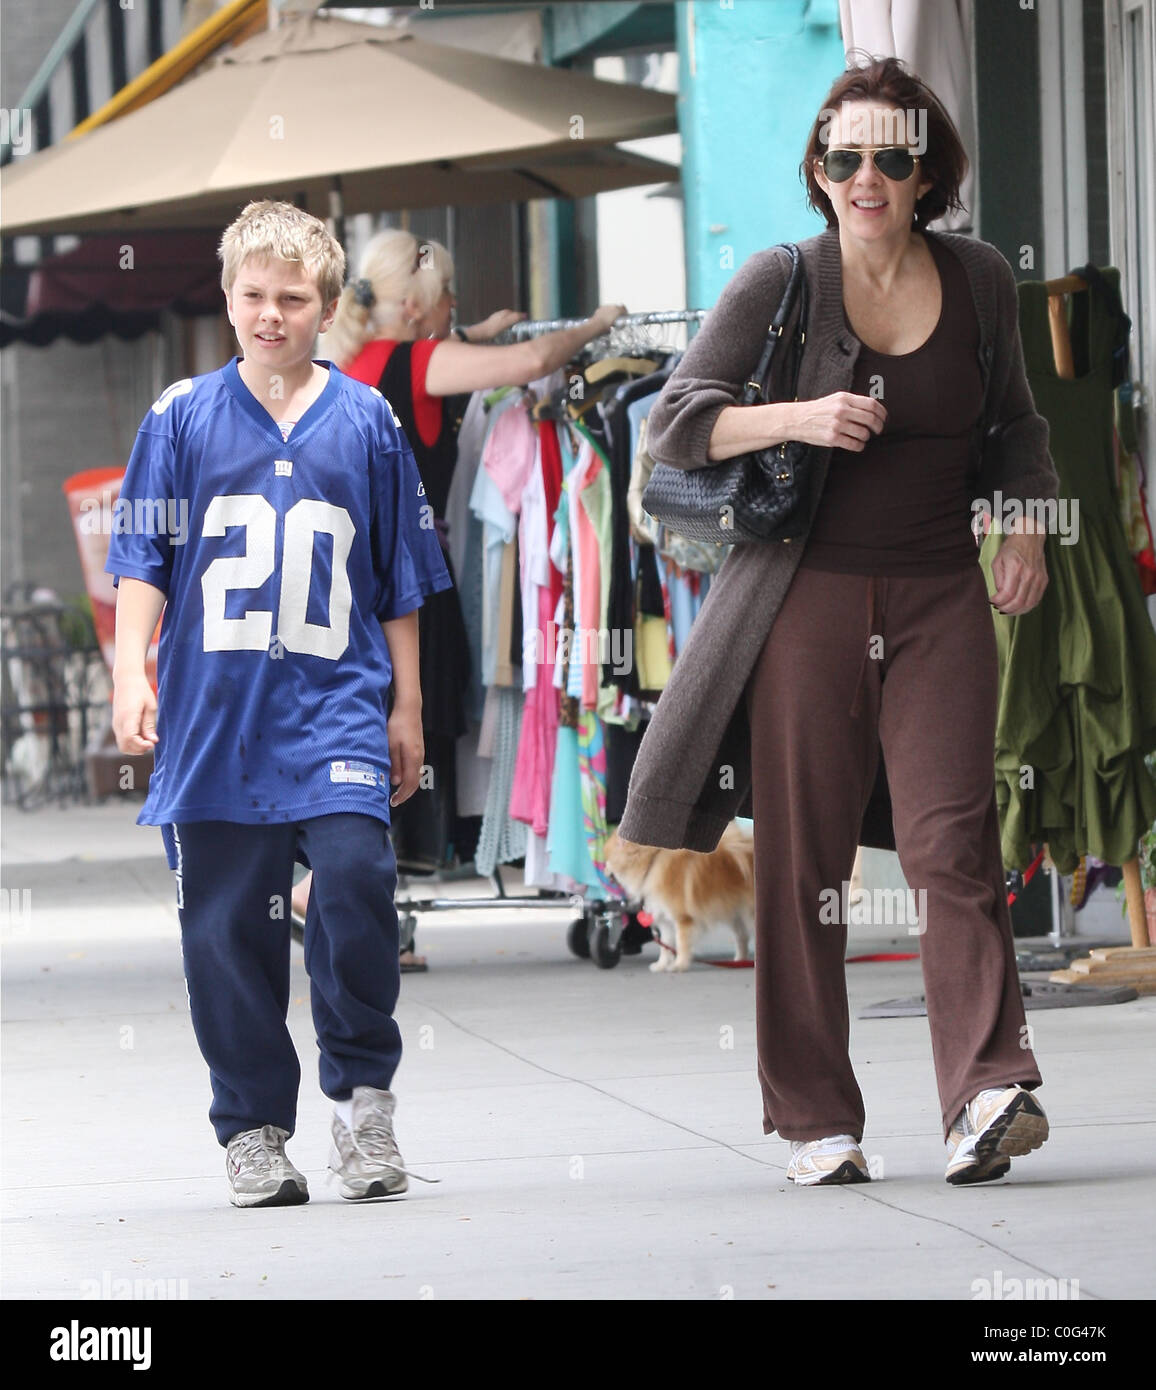 Patricia Heaton on her way to a coffee shop with her son Los Angeles,  California - 10.06.08 Agent 47 Stock Photo - Alamy